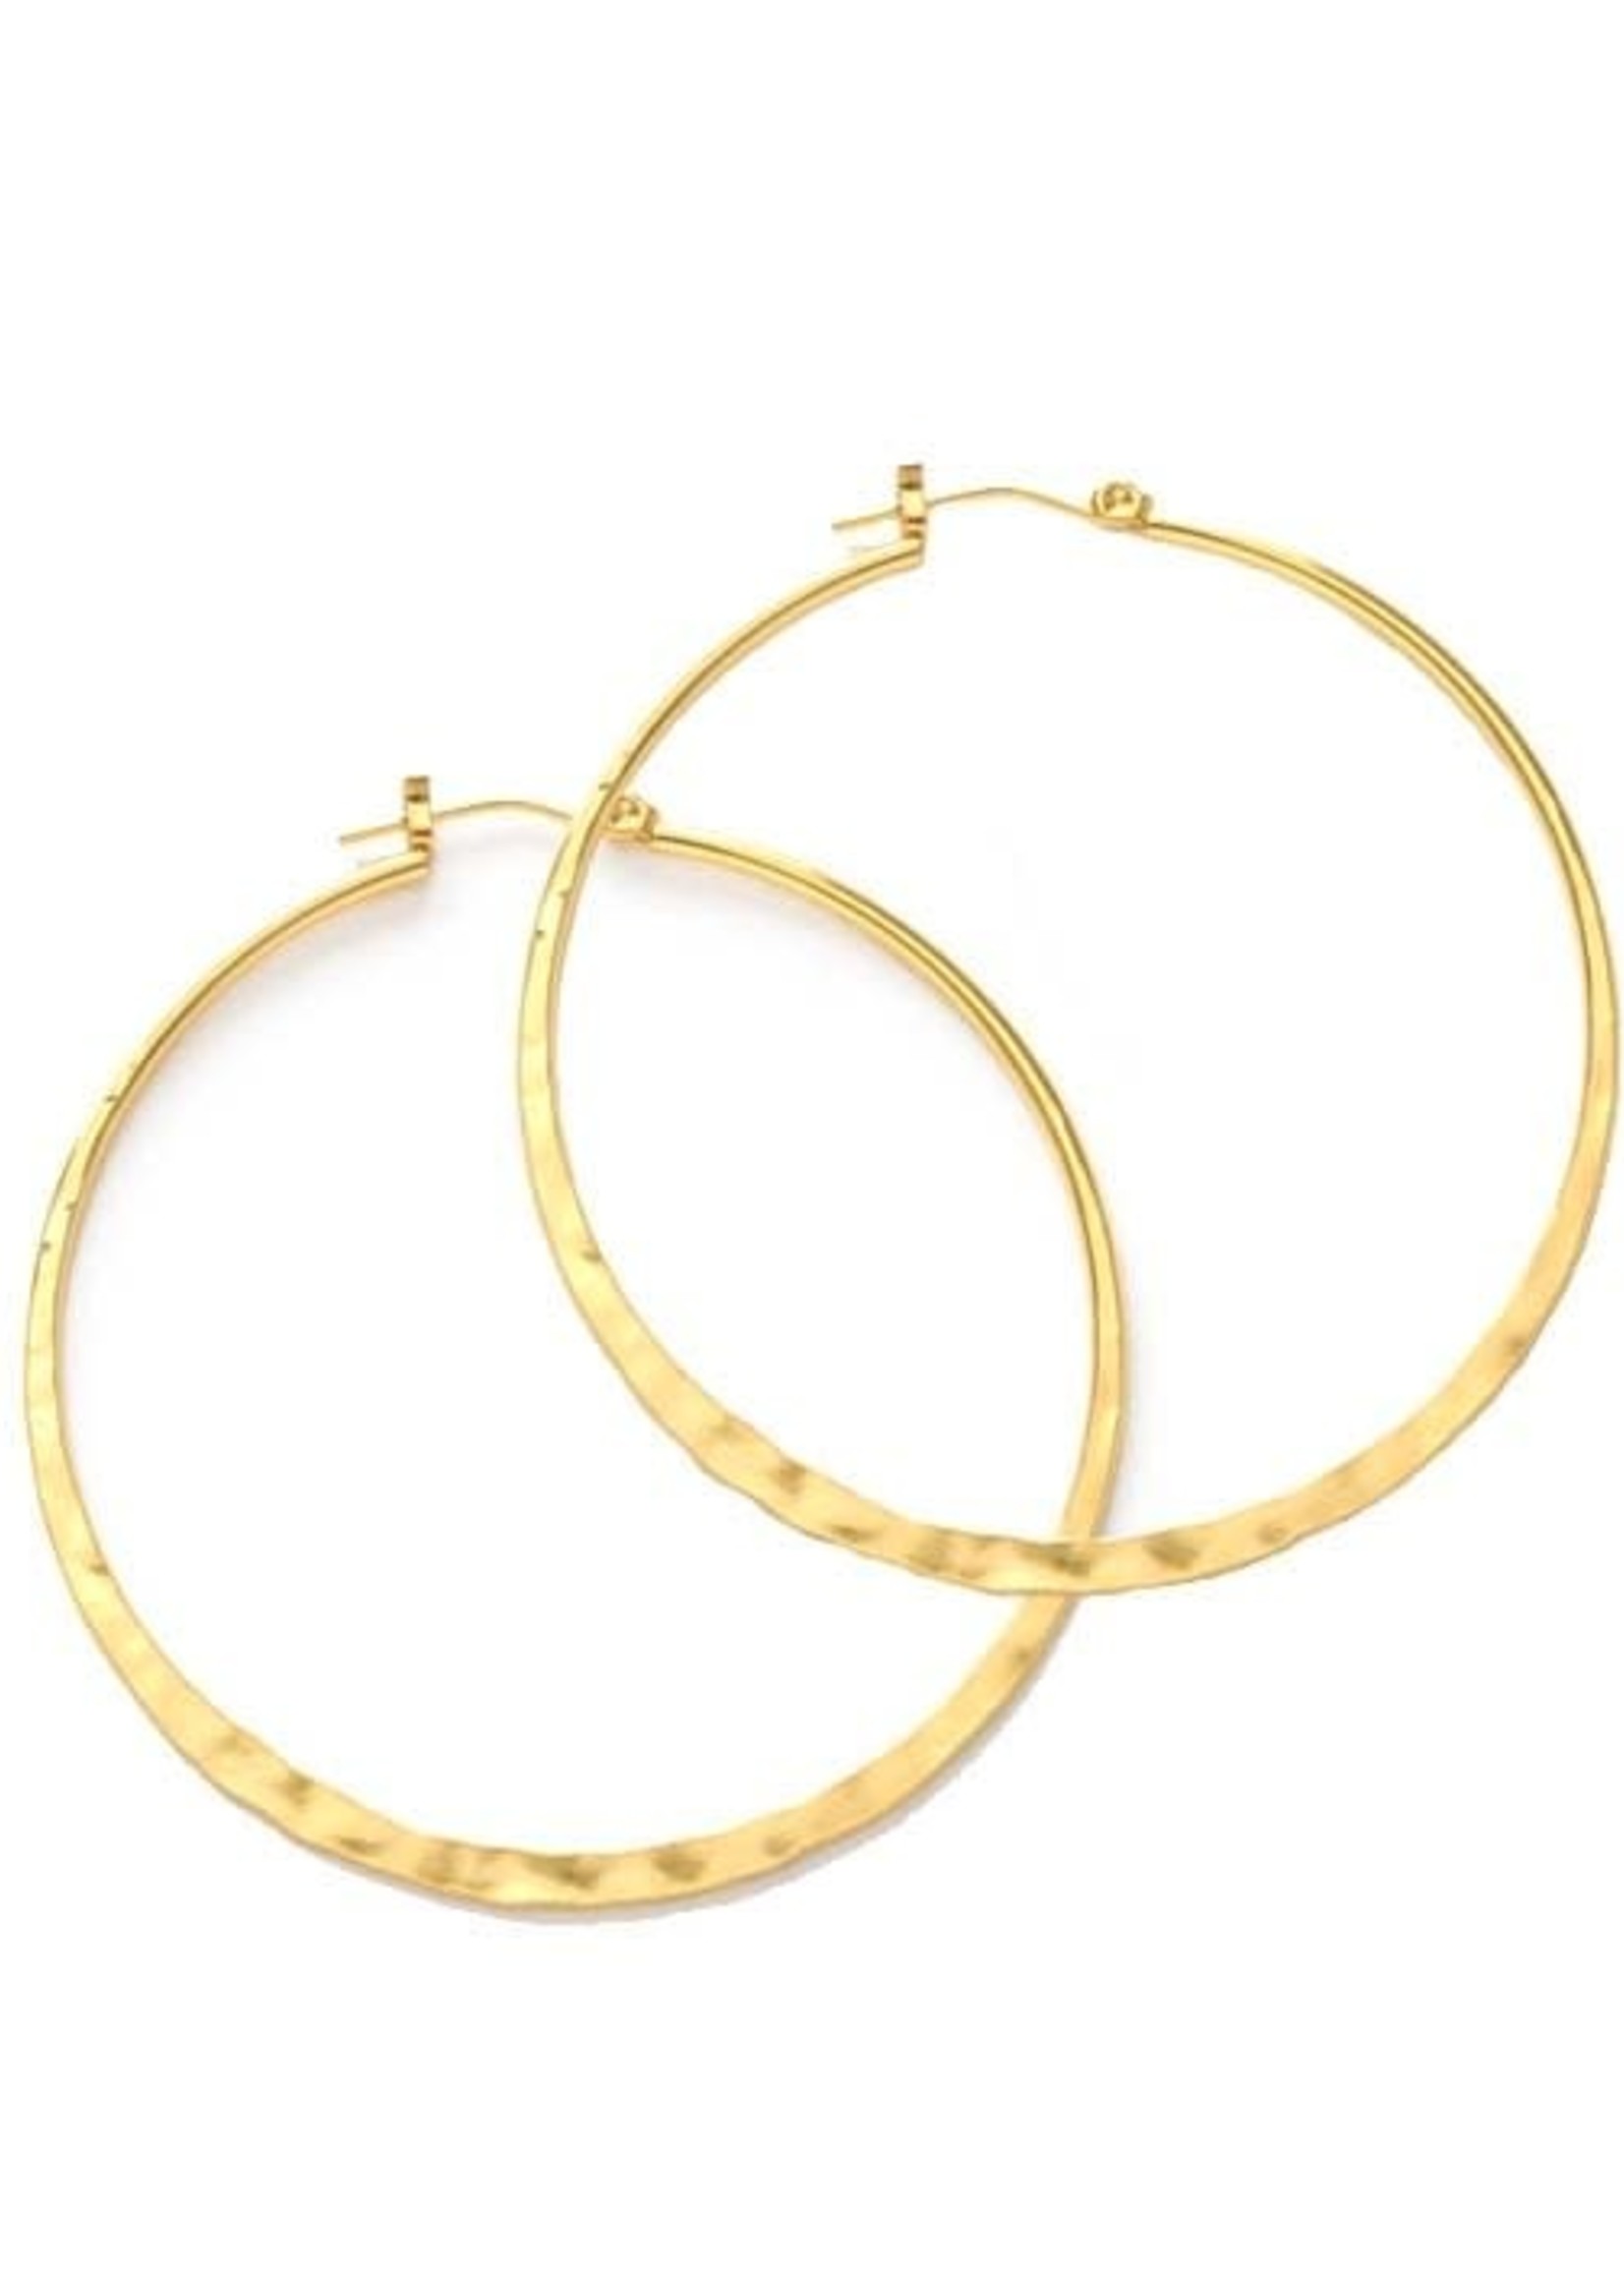 AMANO studio HAMMERED Hoops, 24K gold plated, 1.5"